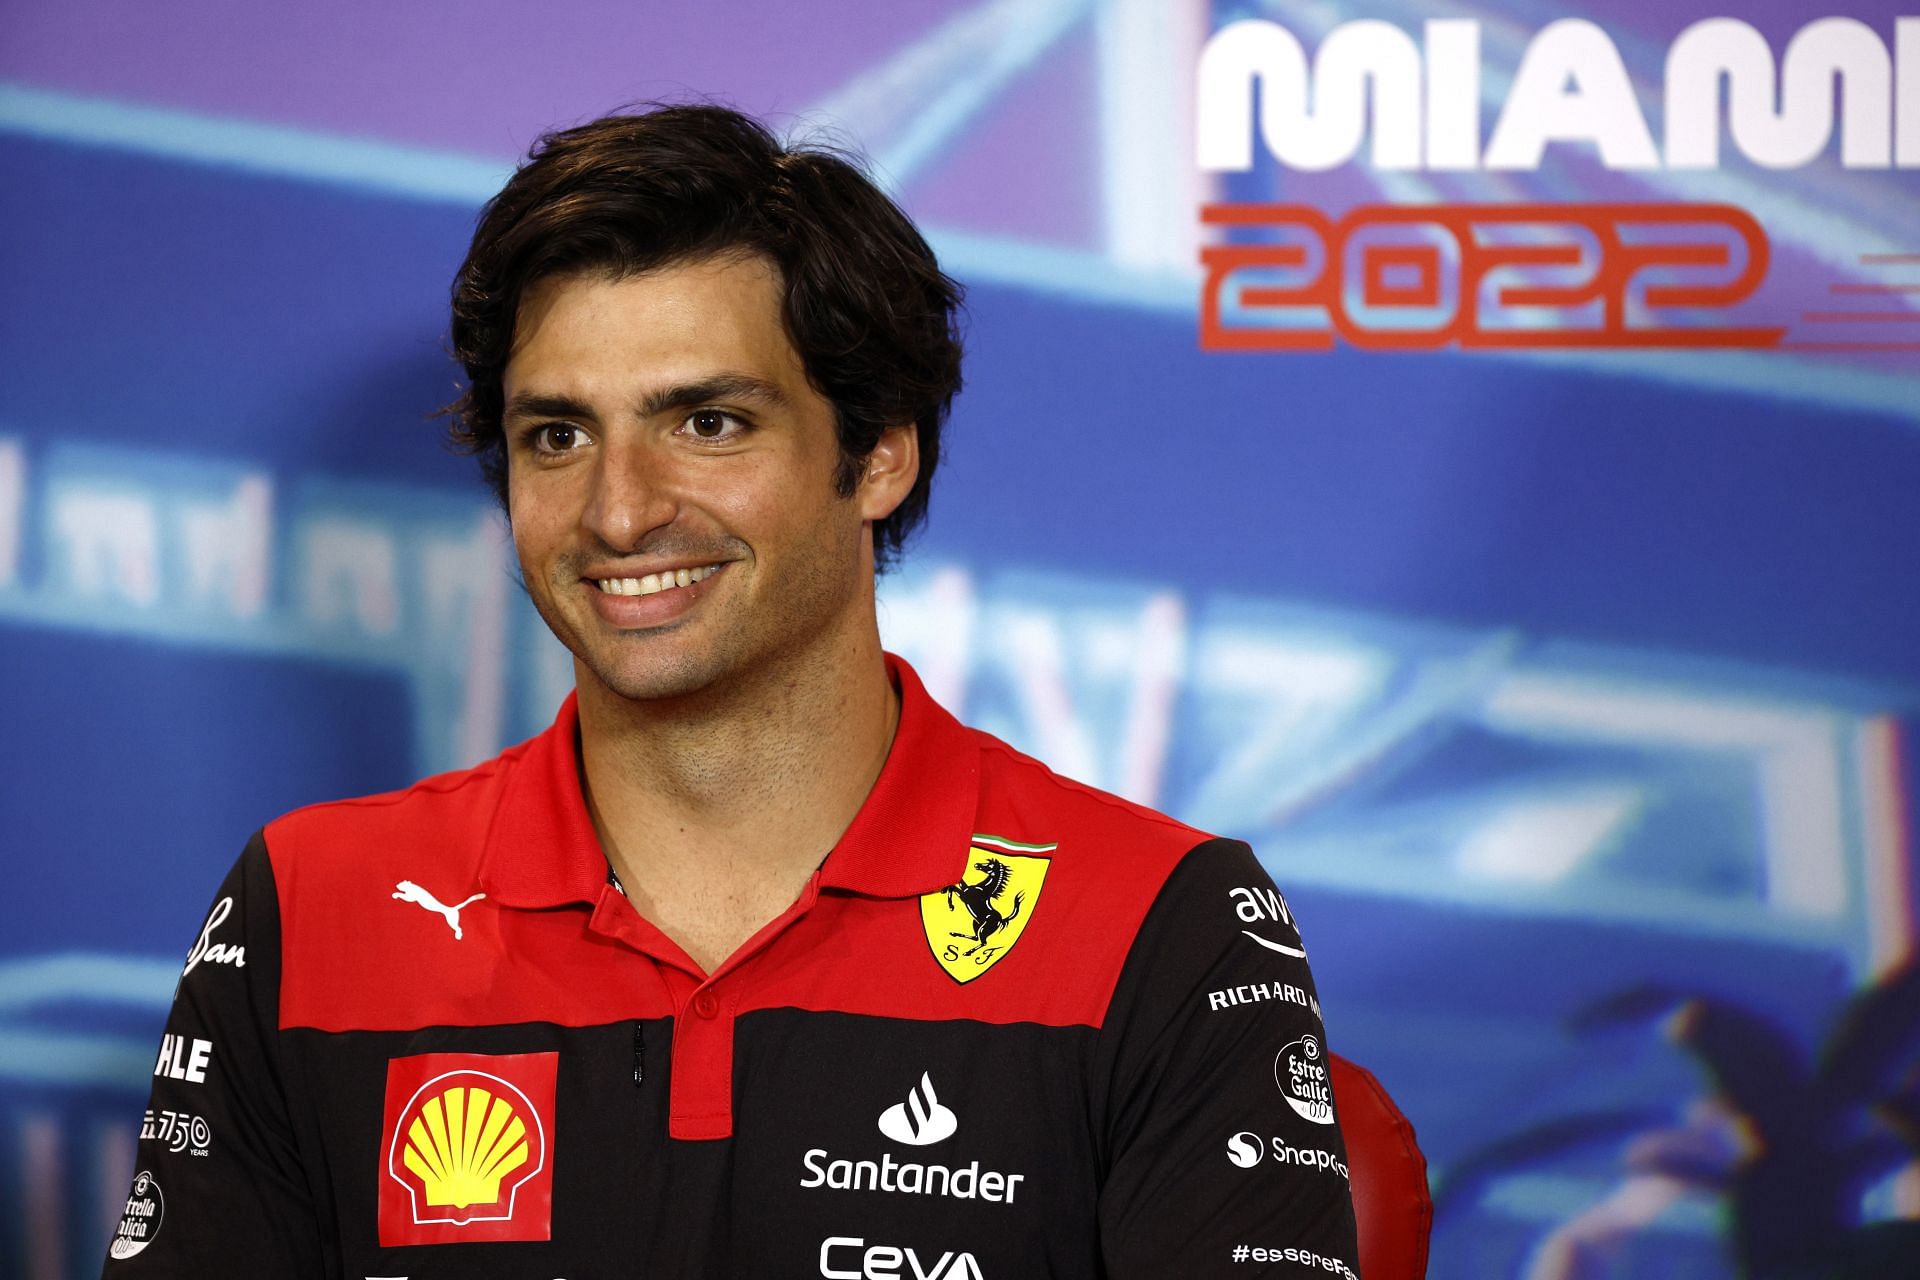 Ferrari driver Carlos Sainz speaks to the press before the 2022 F1 Miami GP (Photo by Jared C. Tilton/Getty Images)